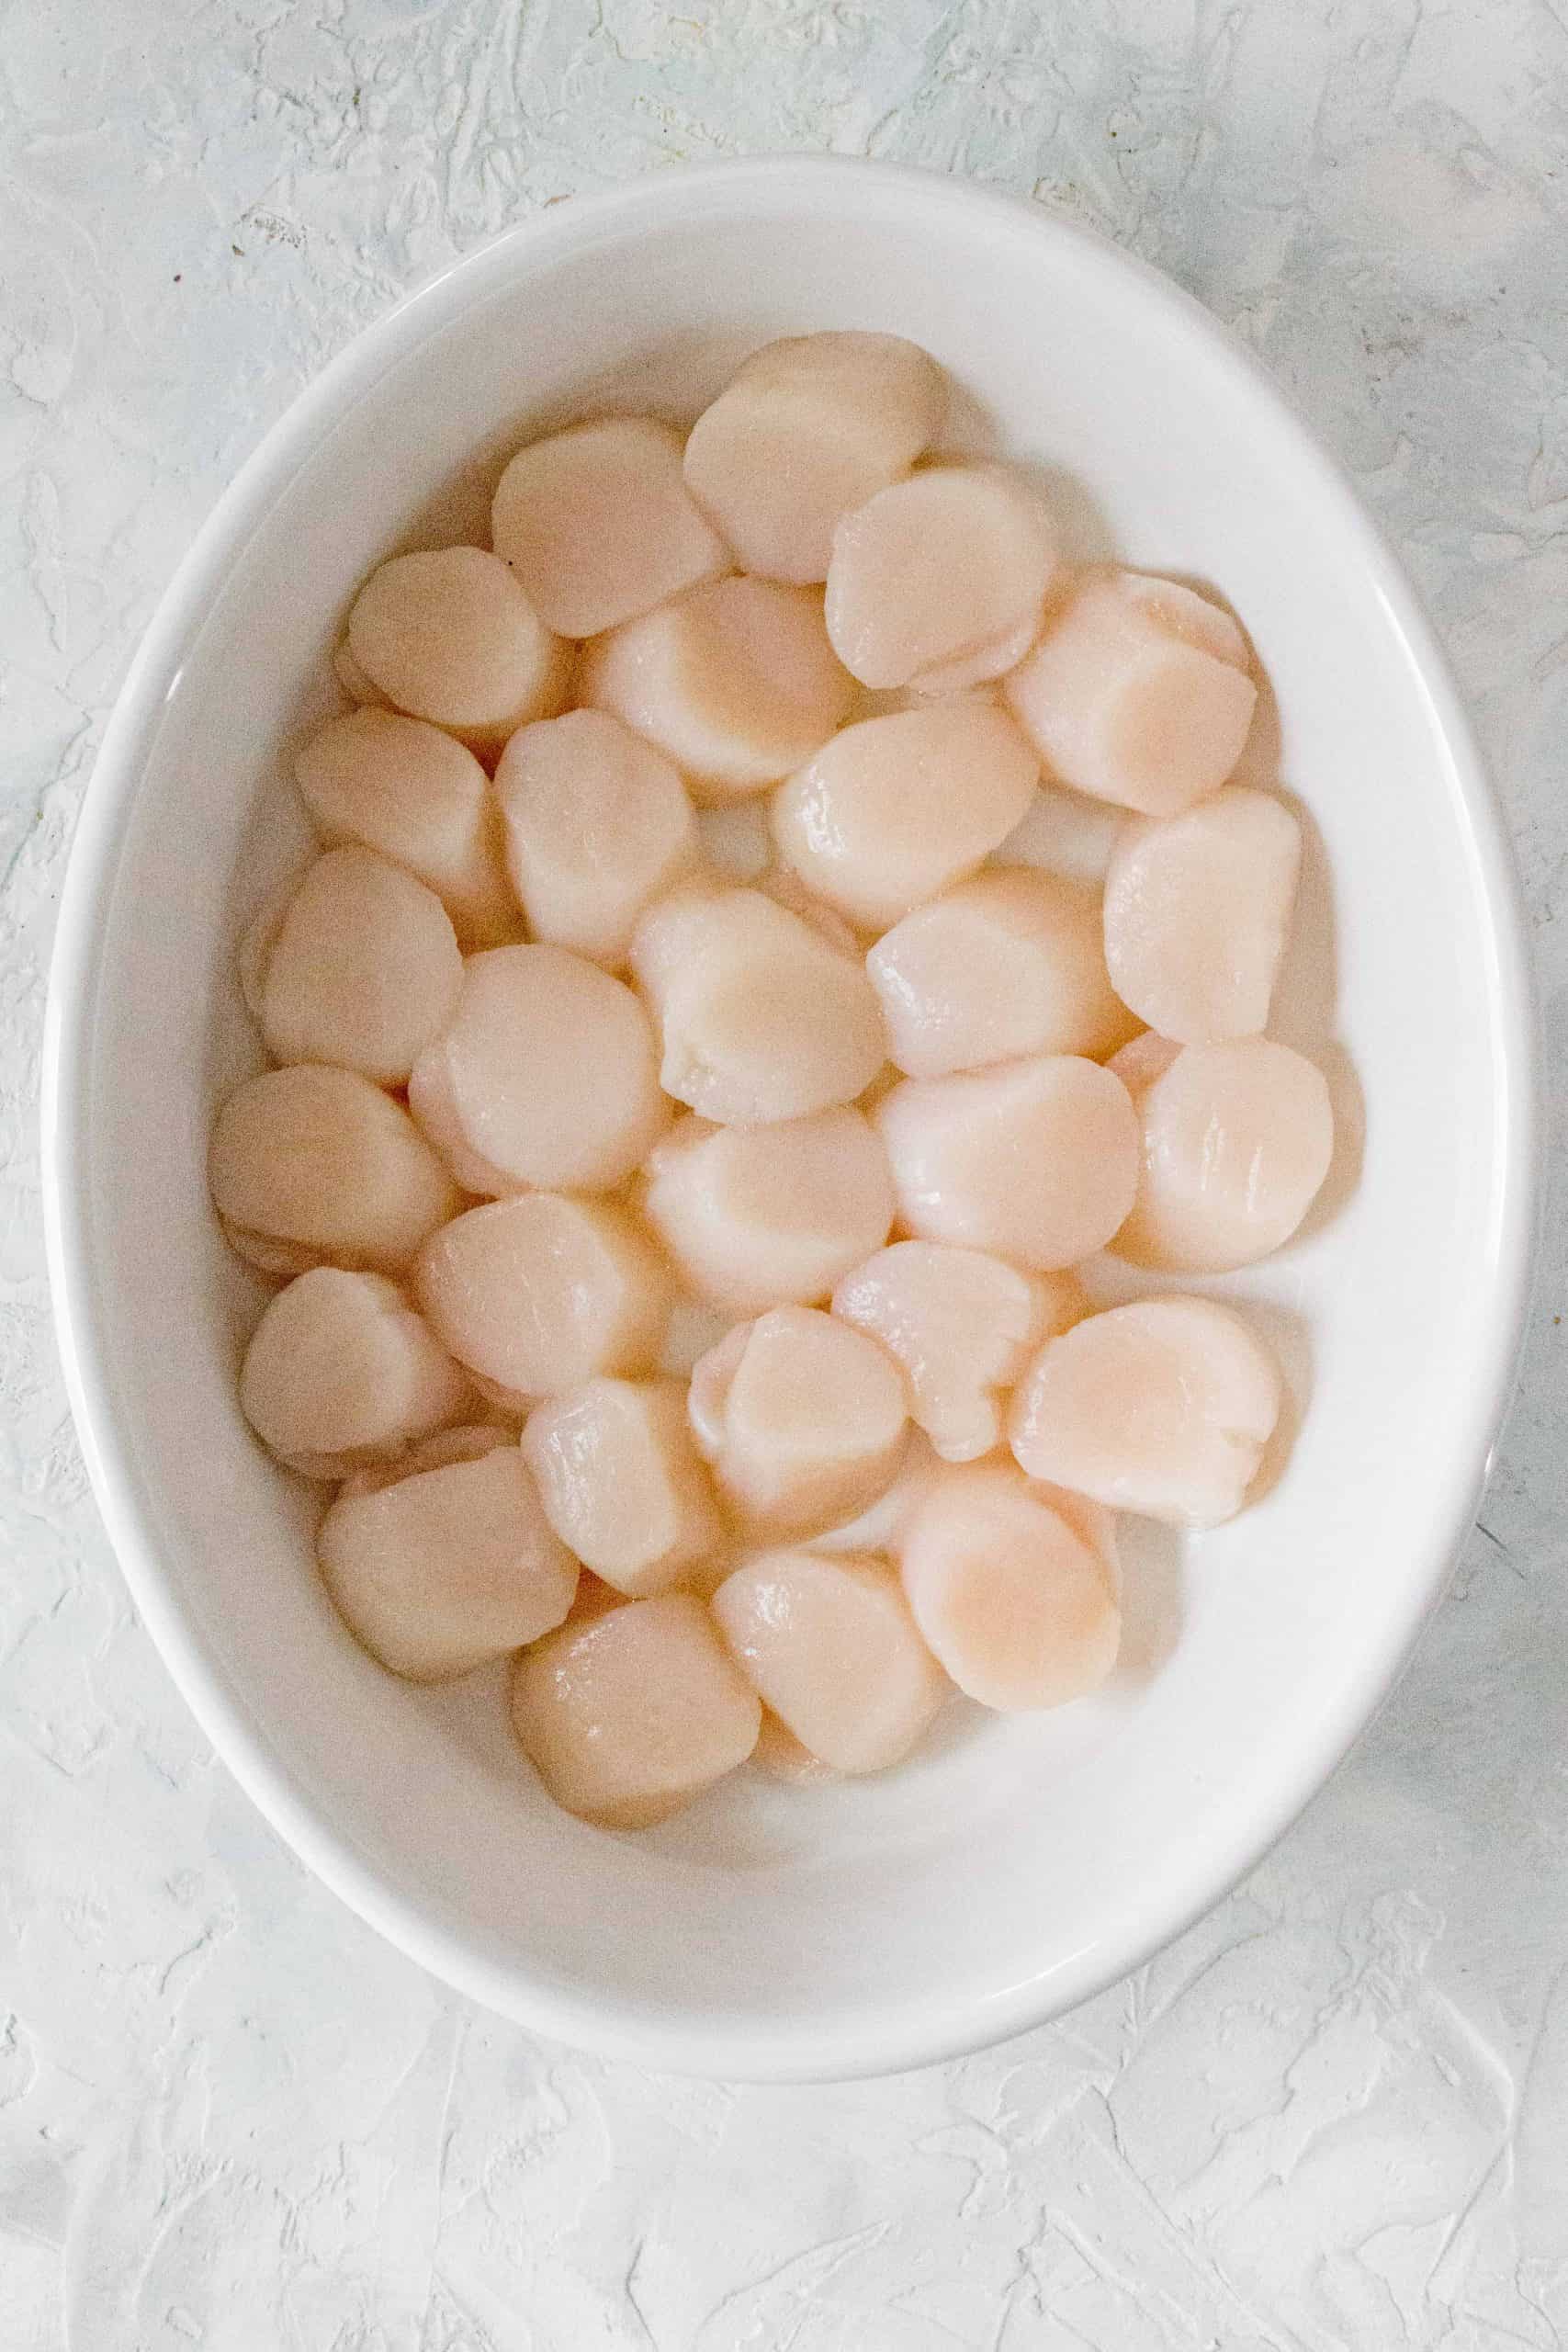 In a baking dish, line your scallops up in a single layer before pouring the butter mixture over the sea scallops.